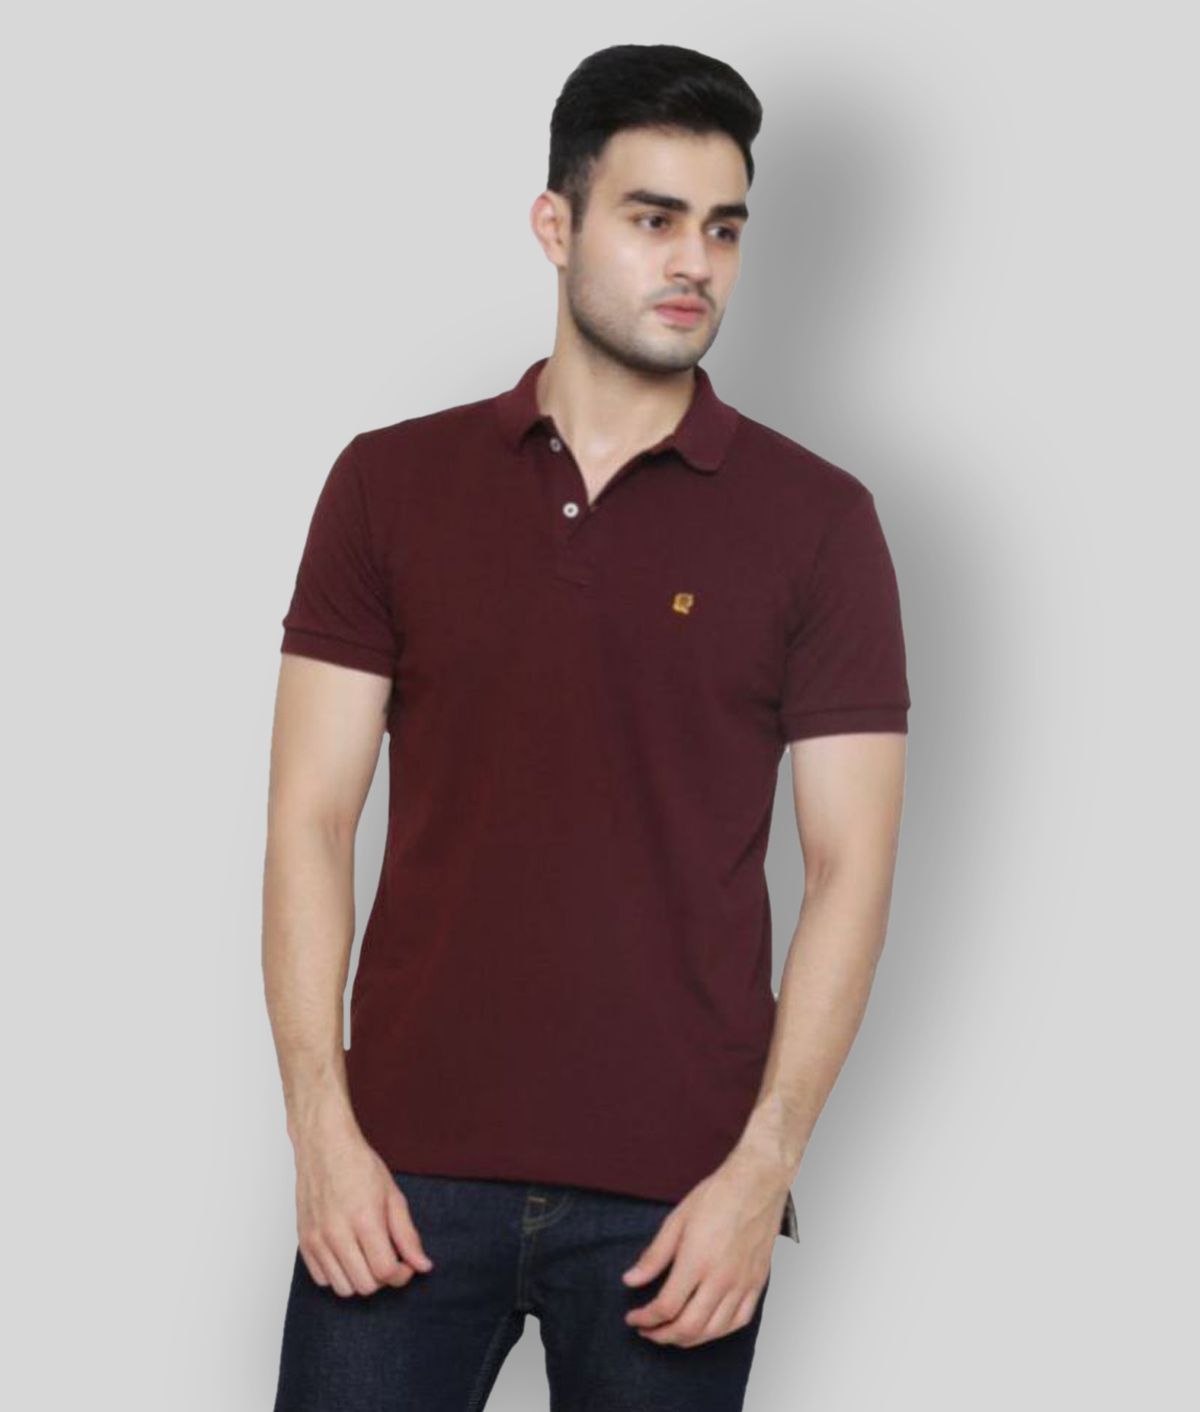     			GENTINO - Brown Cotton Blend Regular Fit Men's Polo T Shirt ( Pack of 1 )